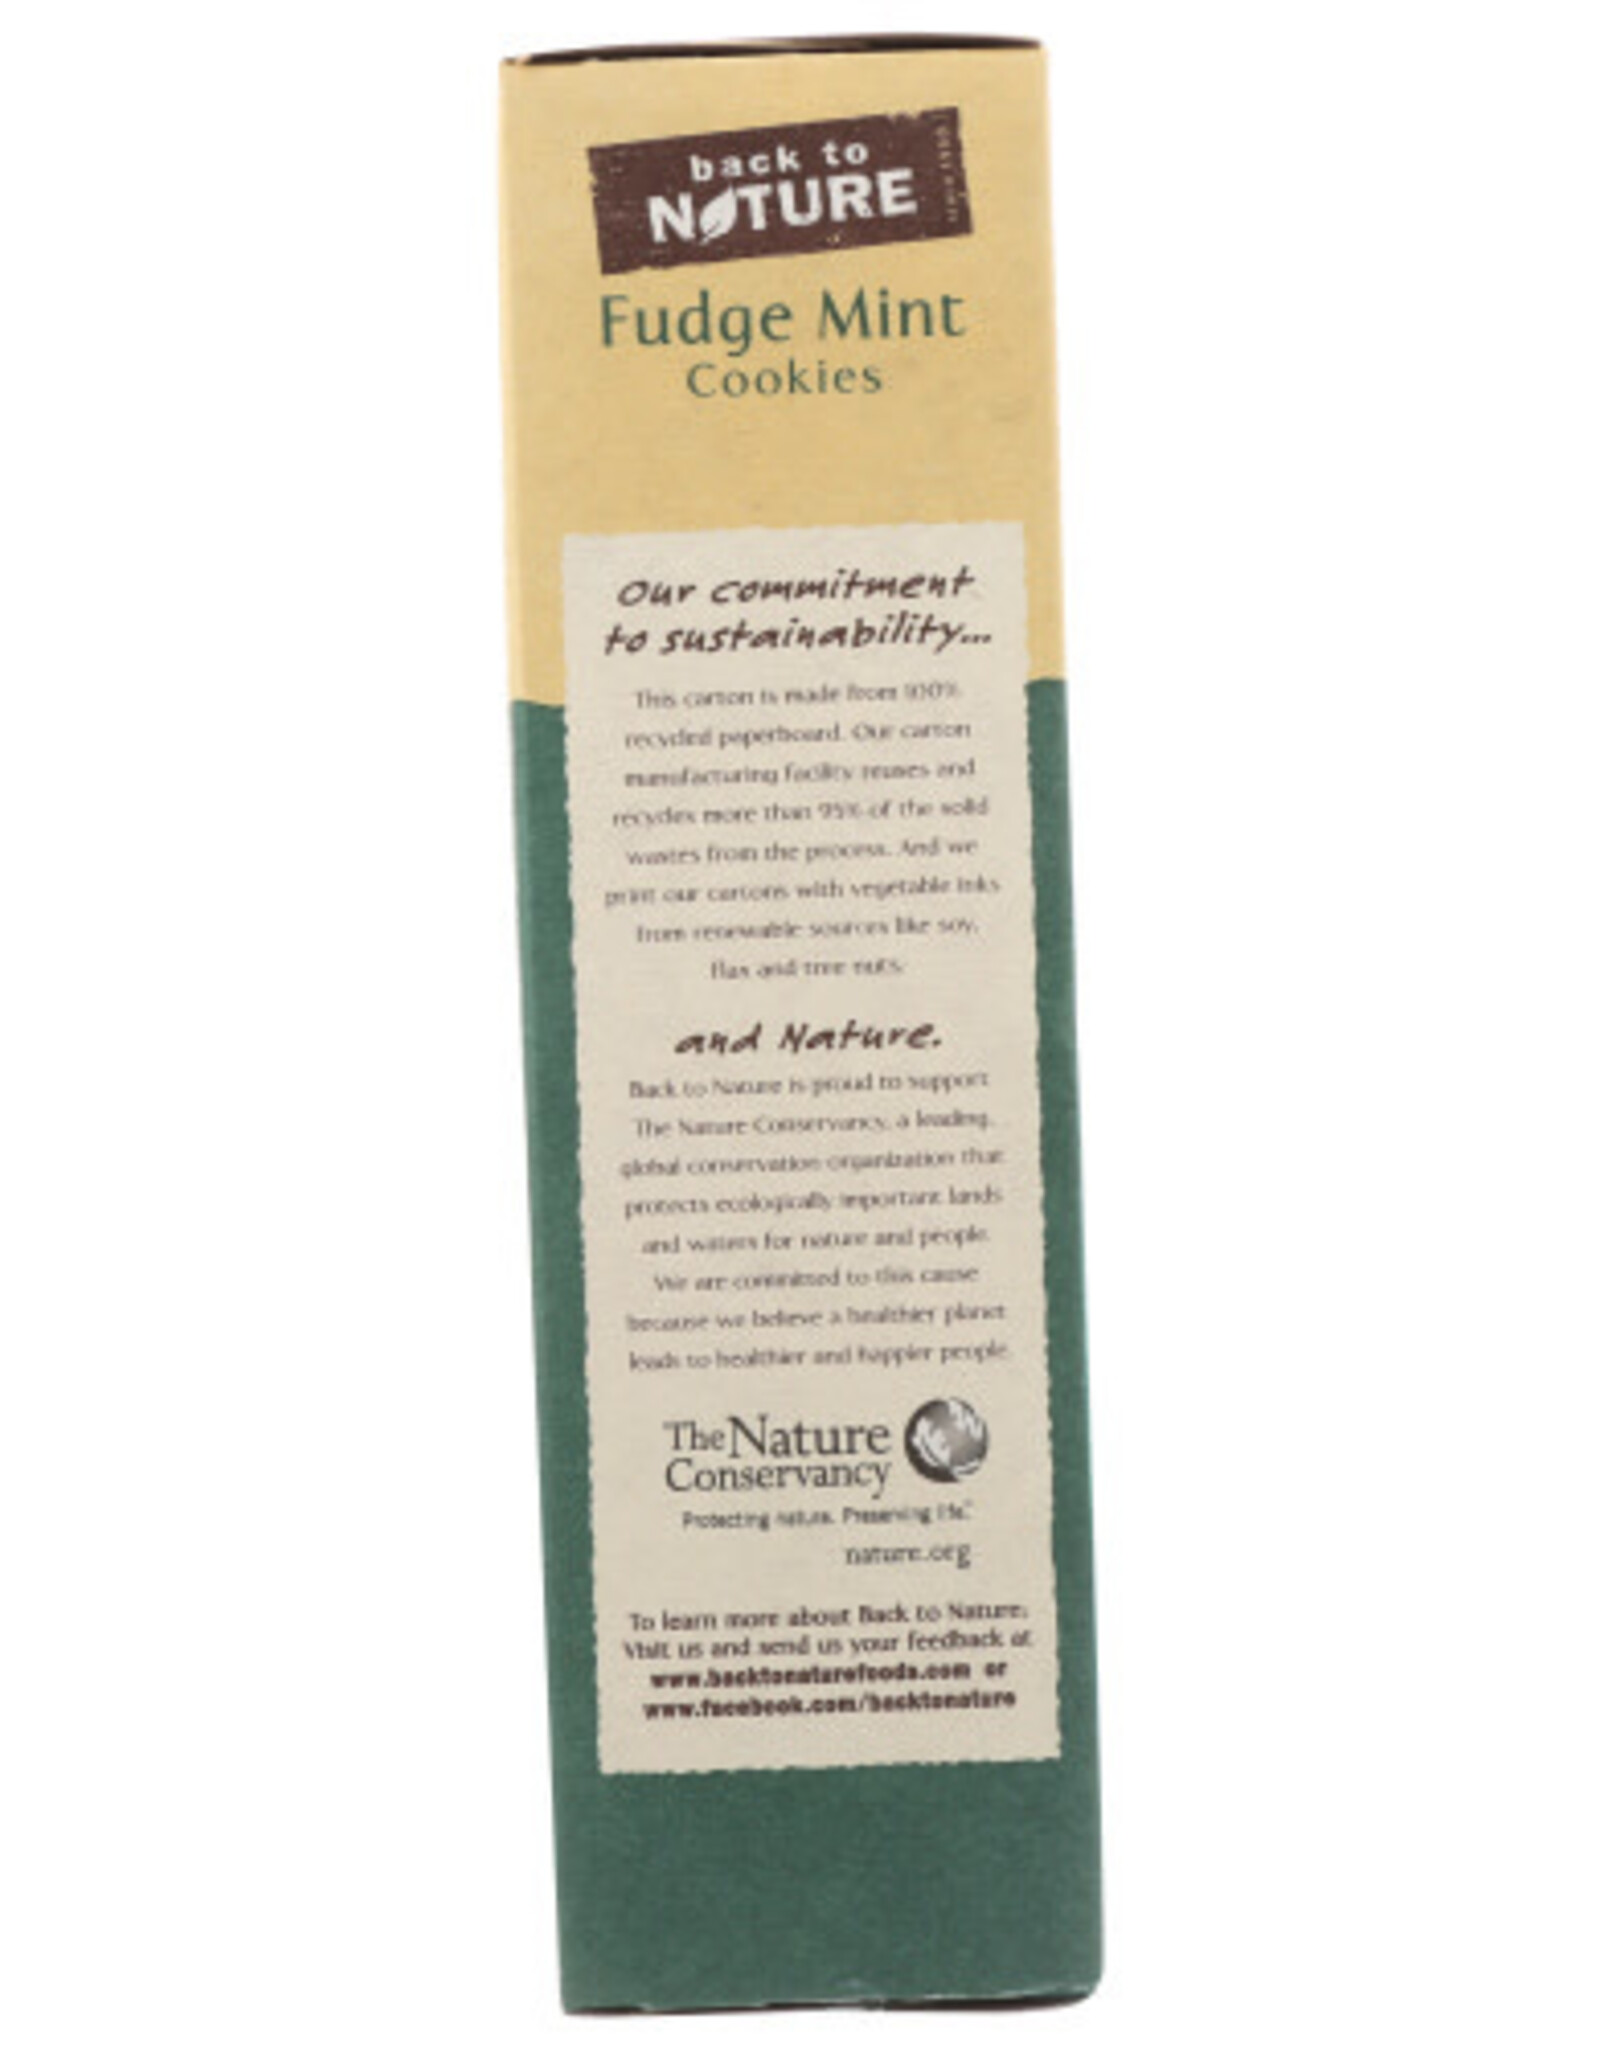 BACK TO NATURE BACK TO NATURE FUDGE MINT COOKIES, 6.4 OZ.